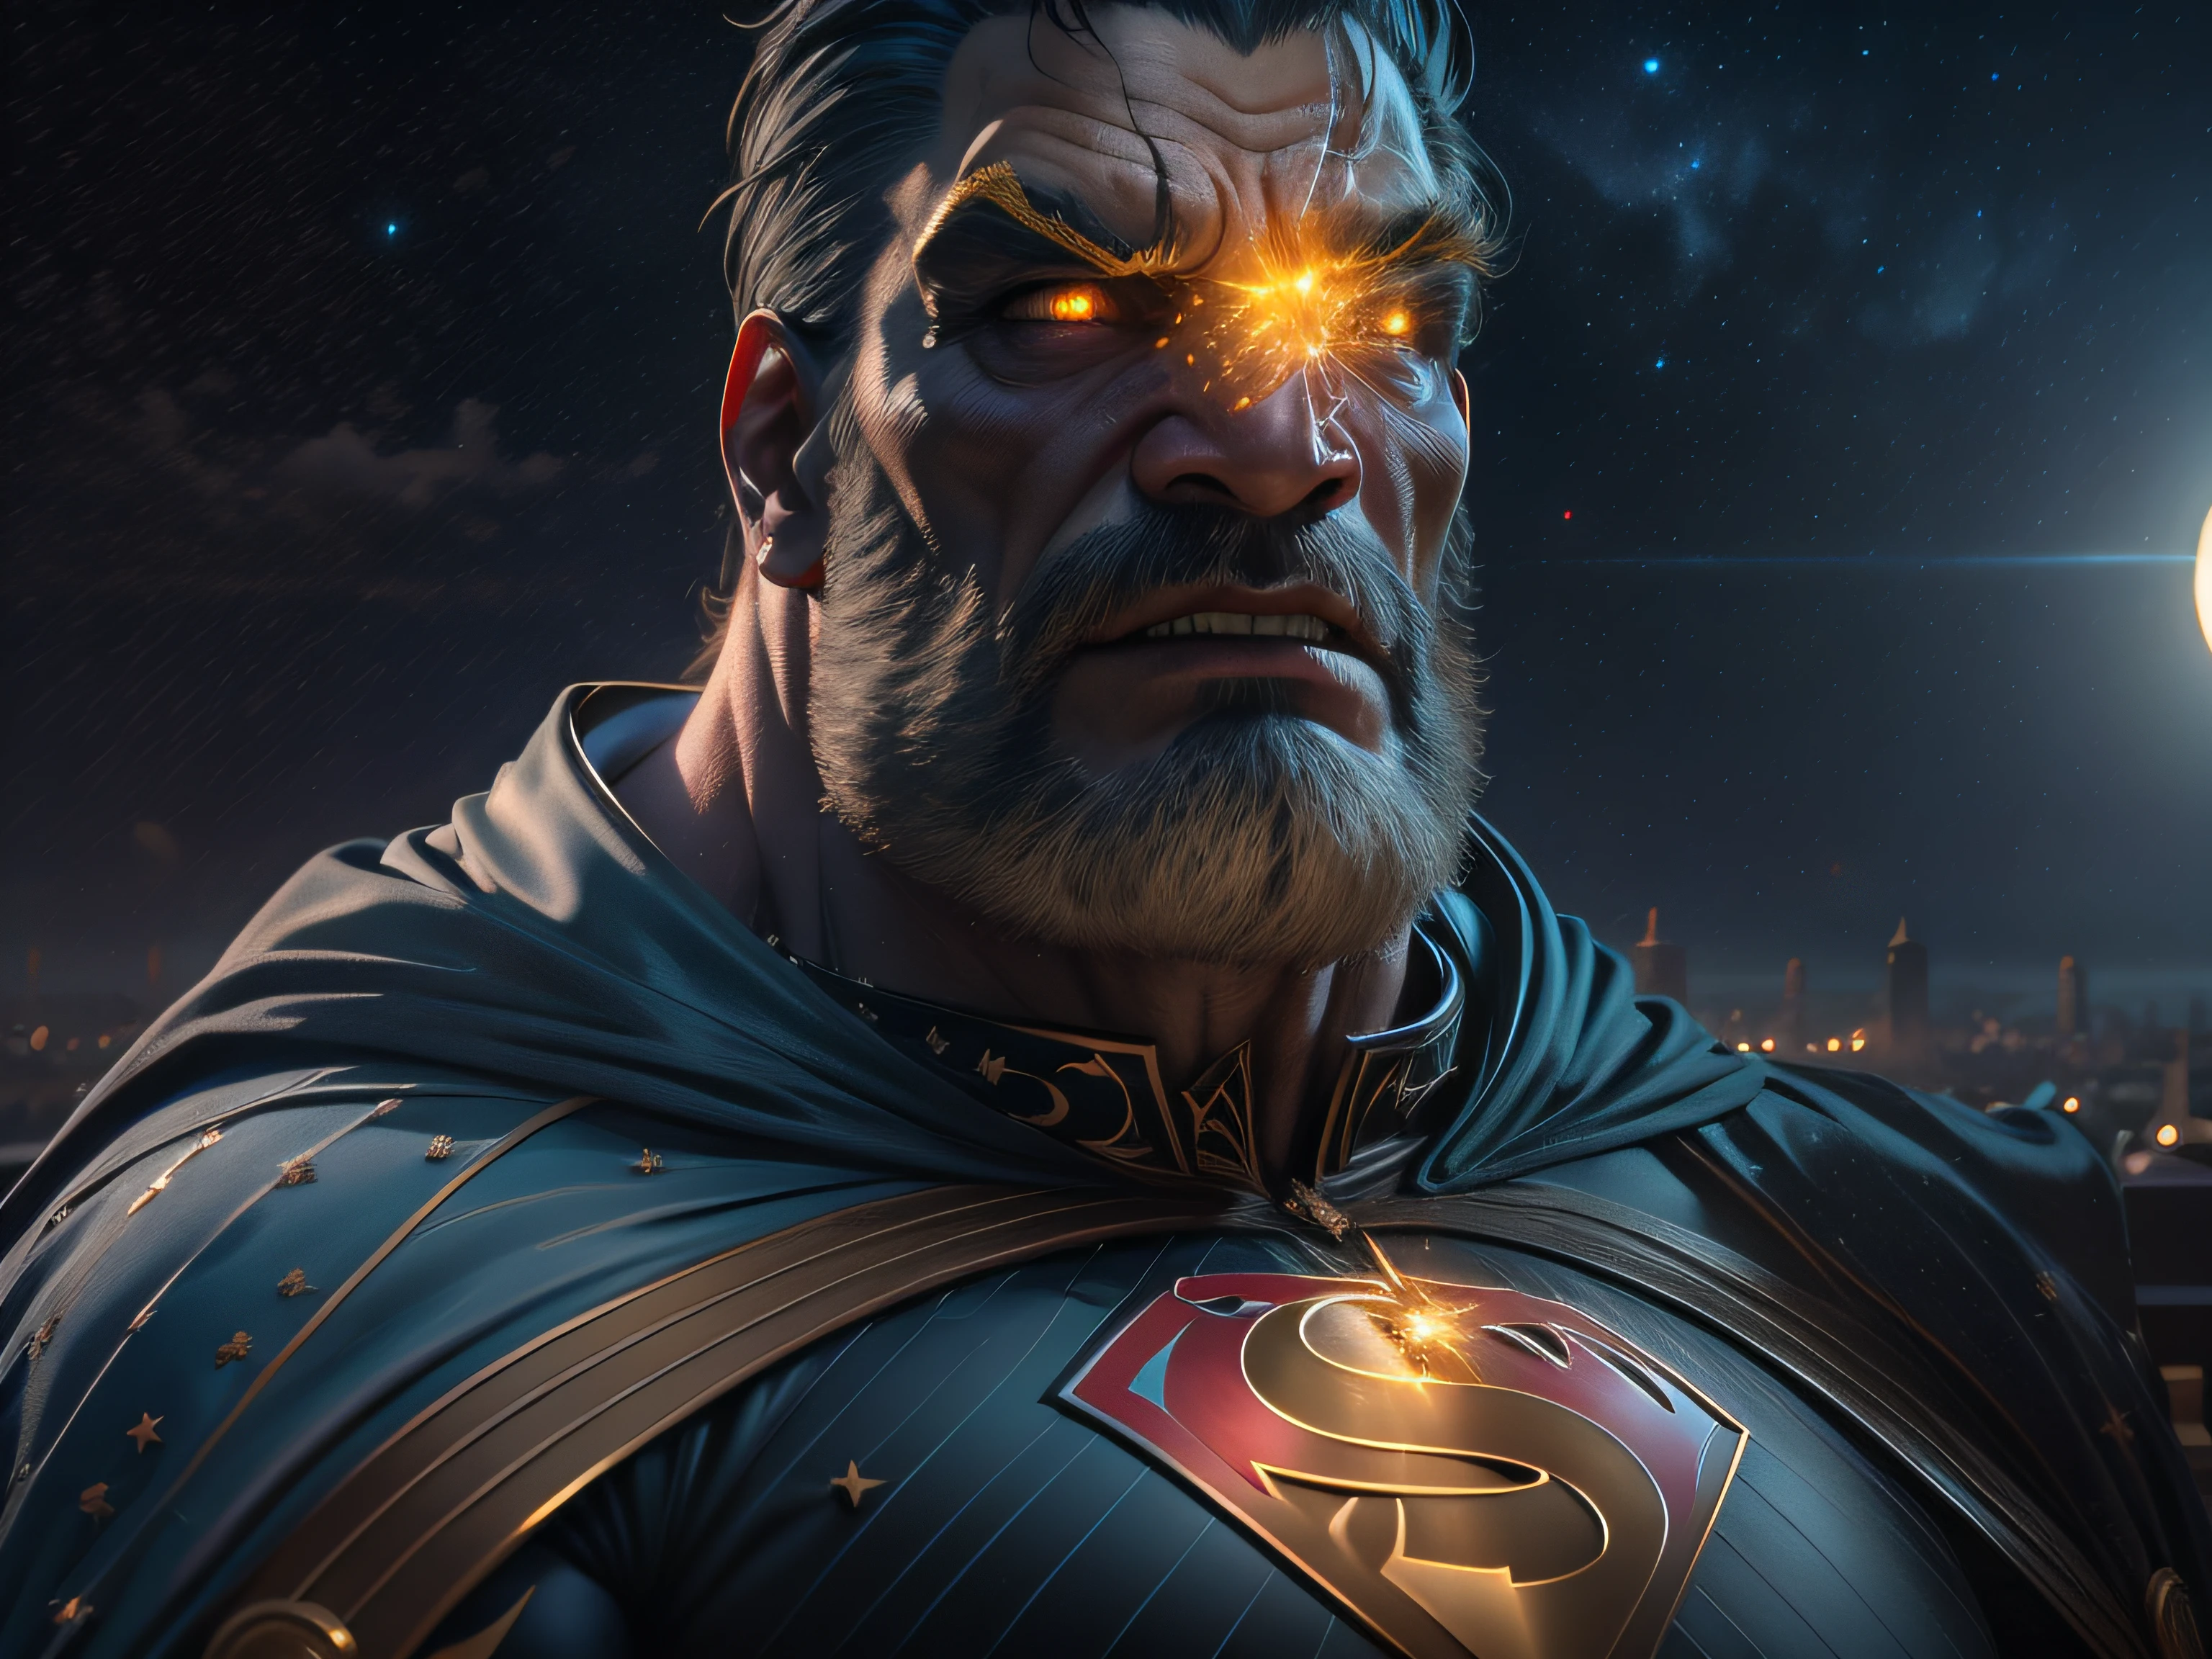 Closeup on a menacing and powerful Hommer Simpson dressed as Superman in an imposing appearance, menacing stare, ricamente detalhado, Hiper realista, 3D-rendering, obra-prima, NVIDIA, RTX, ray-traced, Bokeh, Night sky with a huge and beautiful full moon, estrelas brilhando,